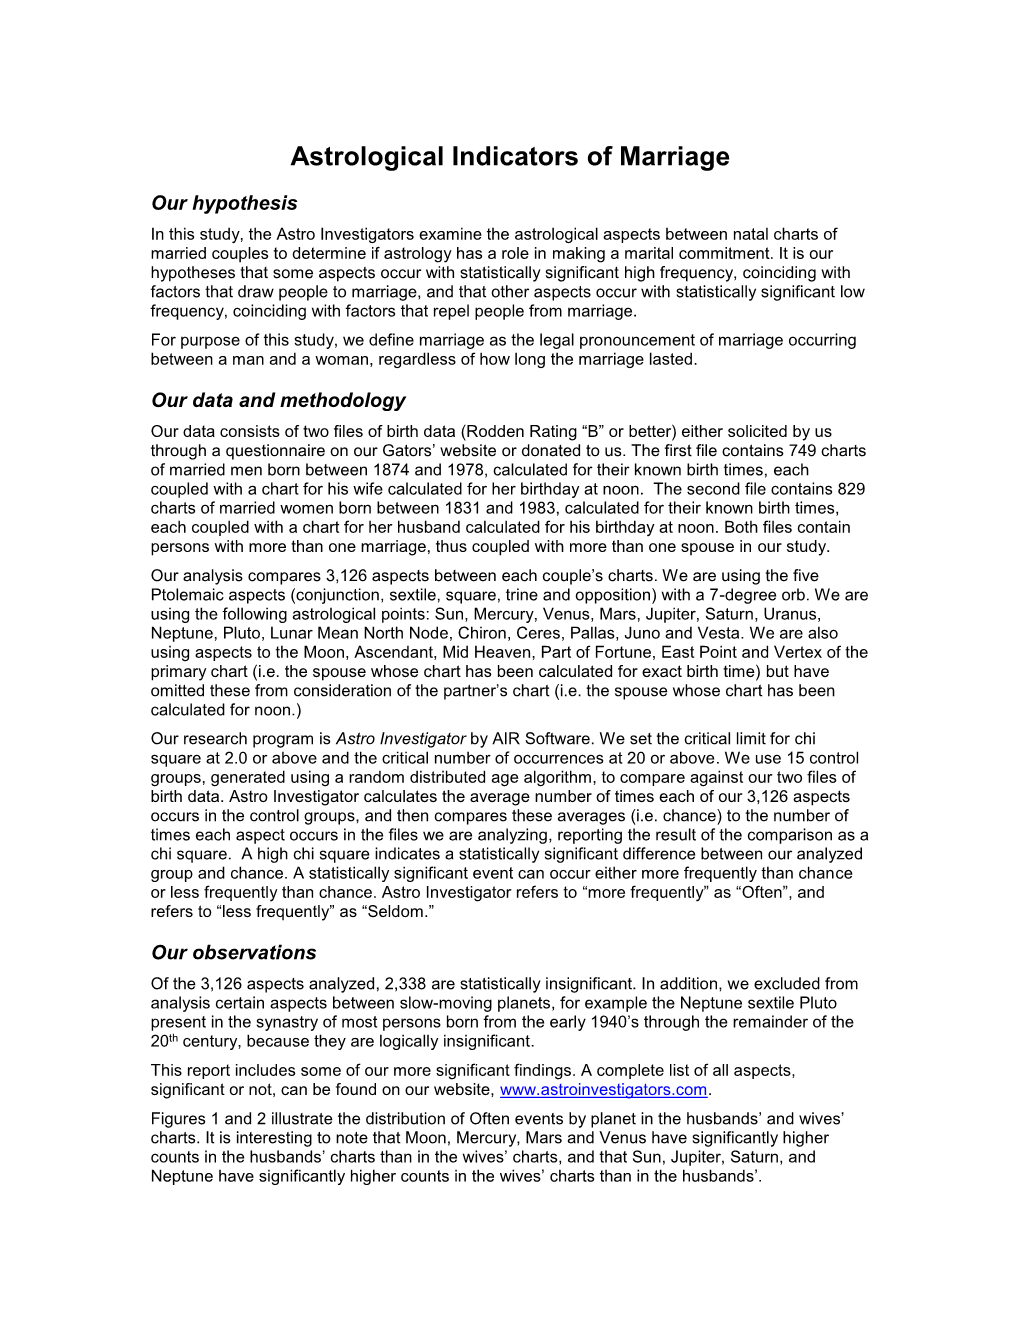 Marriage Synastry Research Project